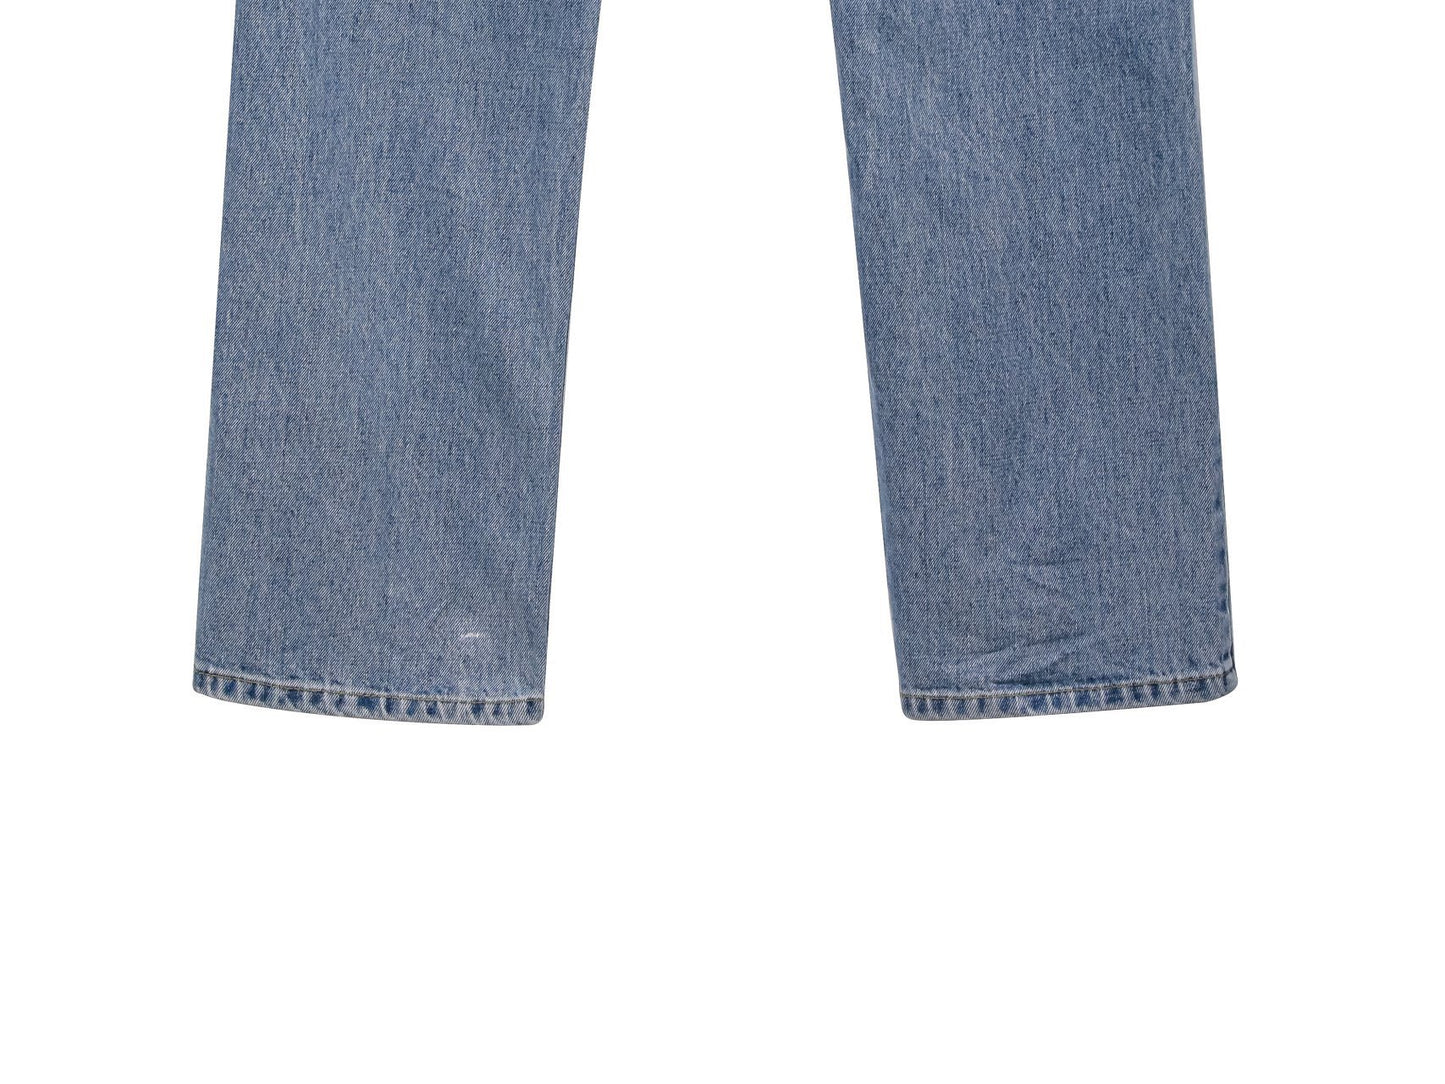 [Ready to ship] [PAPERMOON] AW / Maxi Length Button Fly Boyfriend Jeans